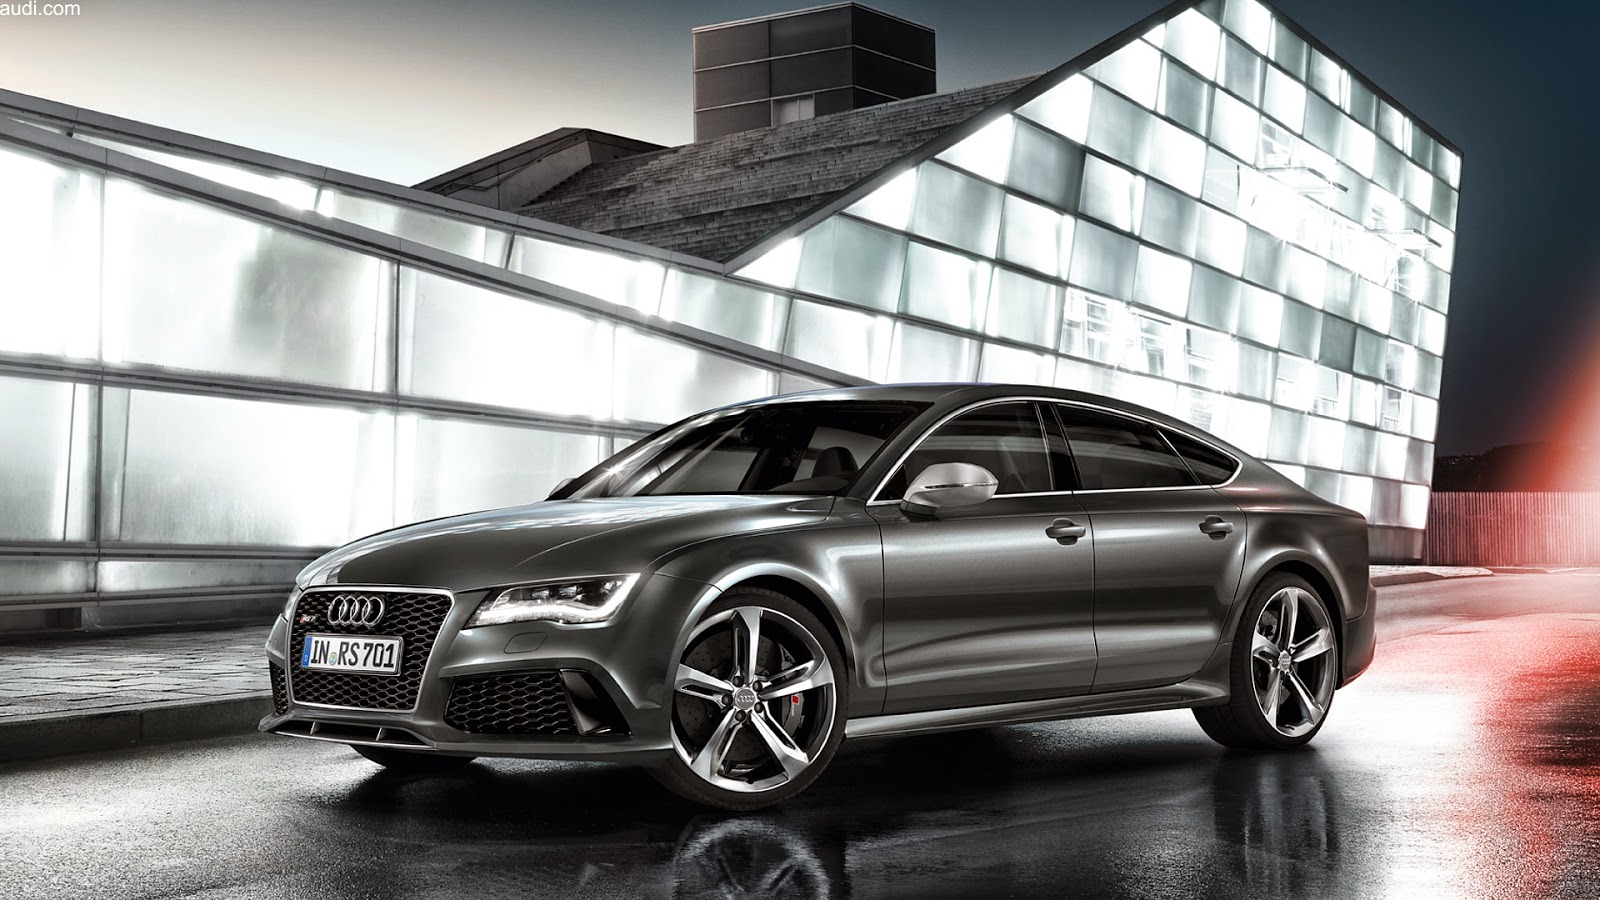 Audi Rs7 Images Hd Wallpapers